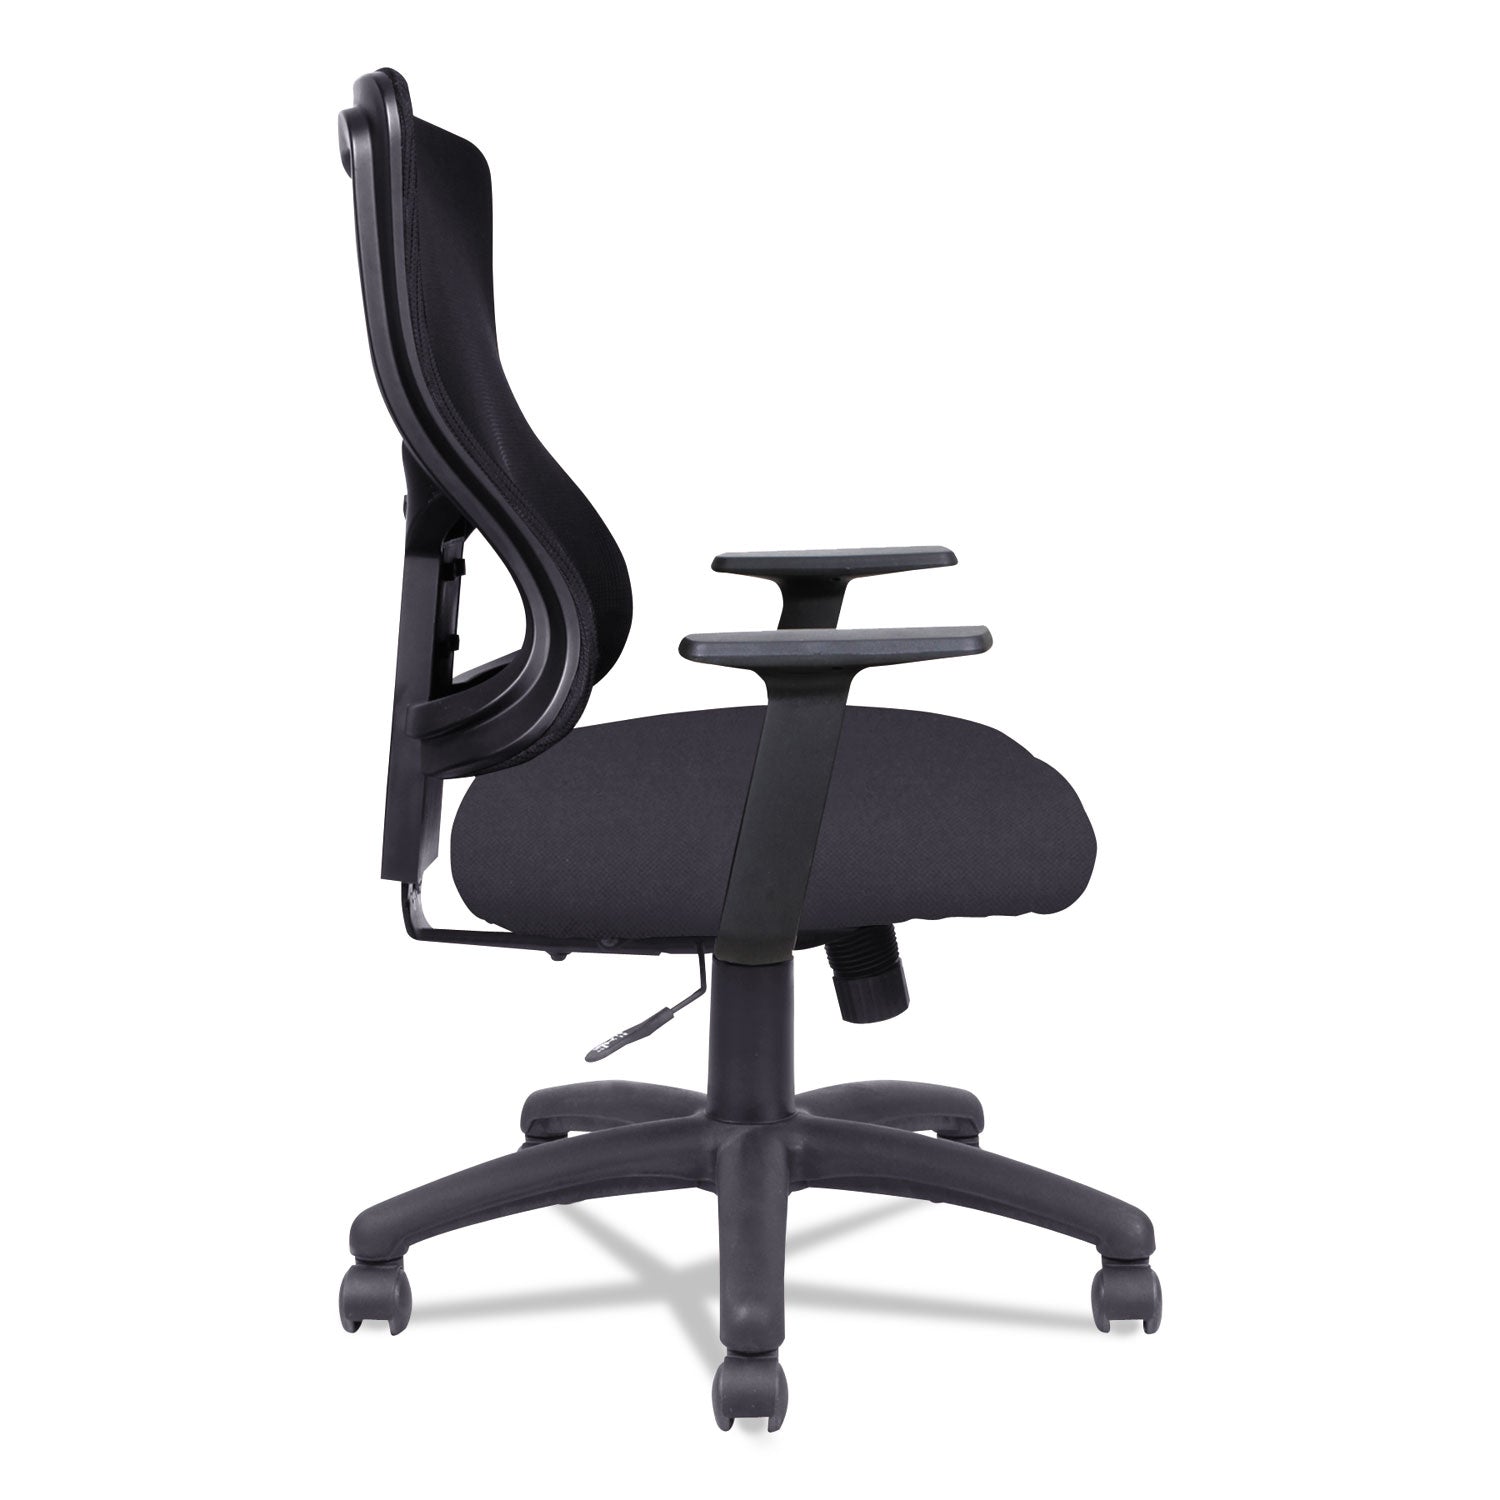 alera-elusion-ii-series-mesh-mid-back-swivel-tilt-chair-supports-up-to-275-lb-1811-to-2177-seat-height-black_aleelt4214b - 3